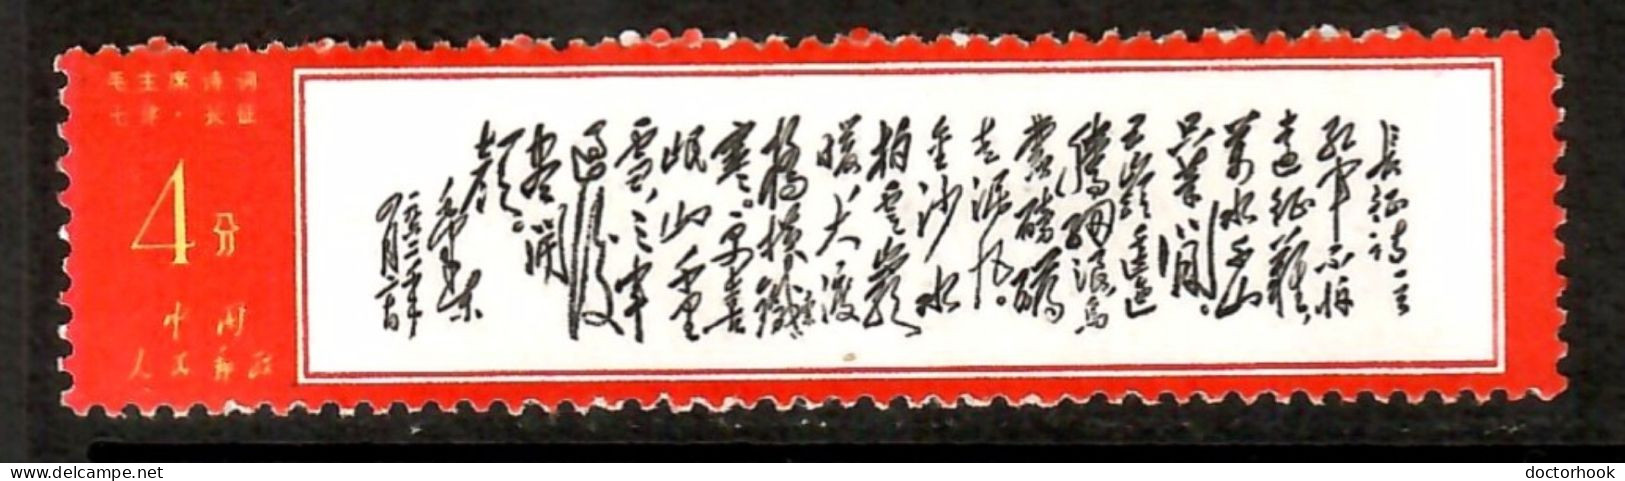 PEOPLES REPUBLIC Of CHINA   Scott # 967** MINT NH (CONDITION AS PER SCAN) (Stamp Scan # 1013-1) - Ongebruikt